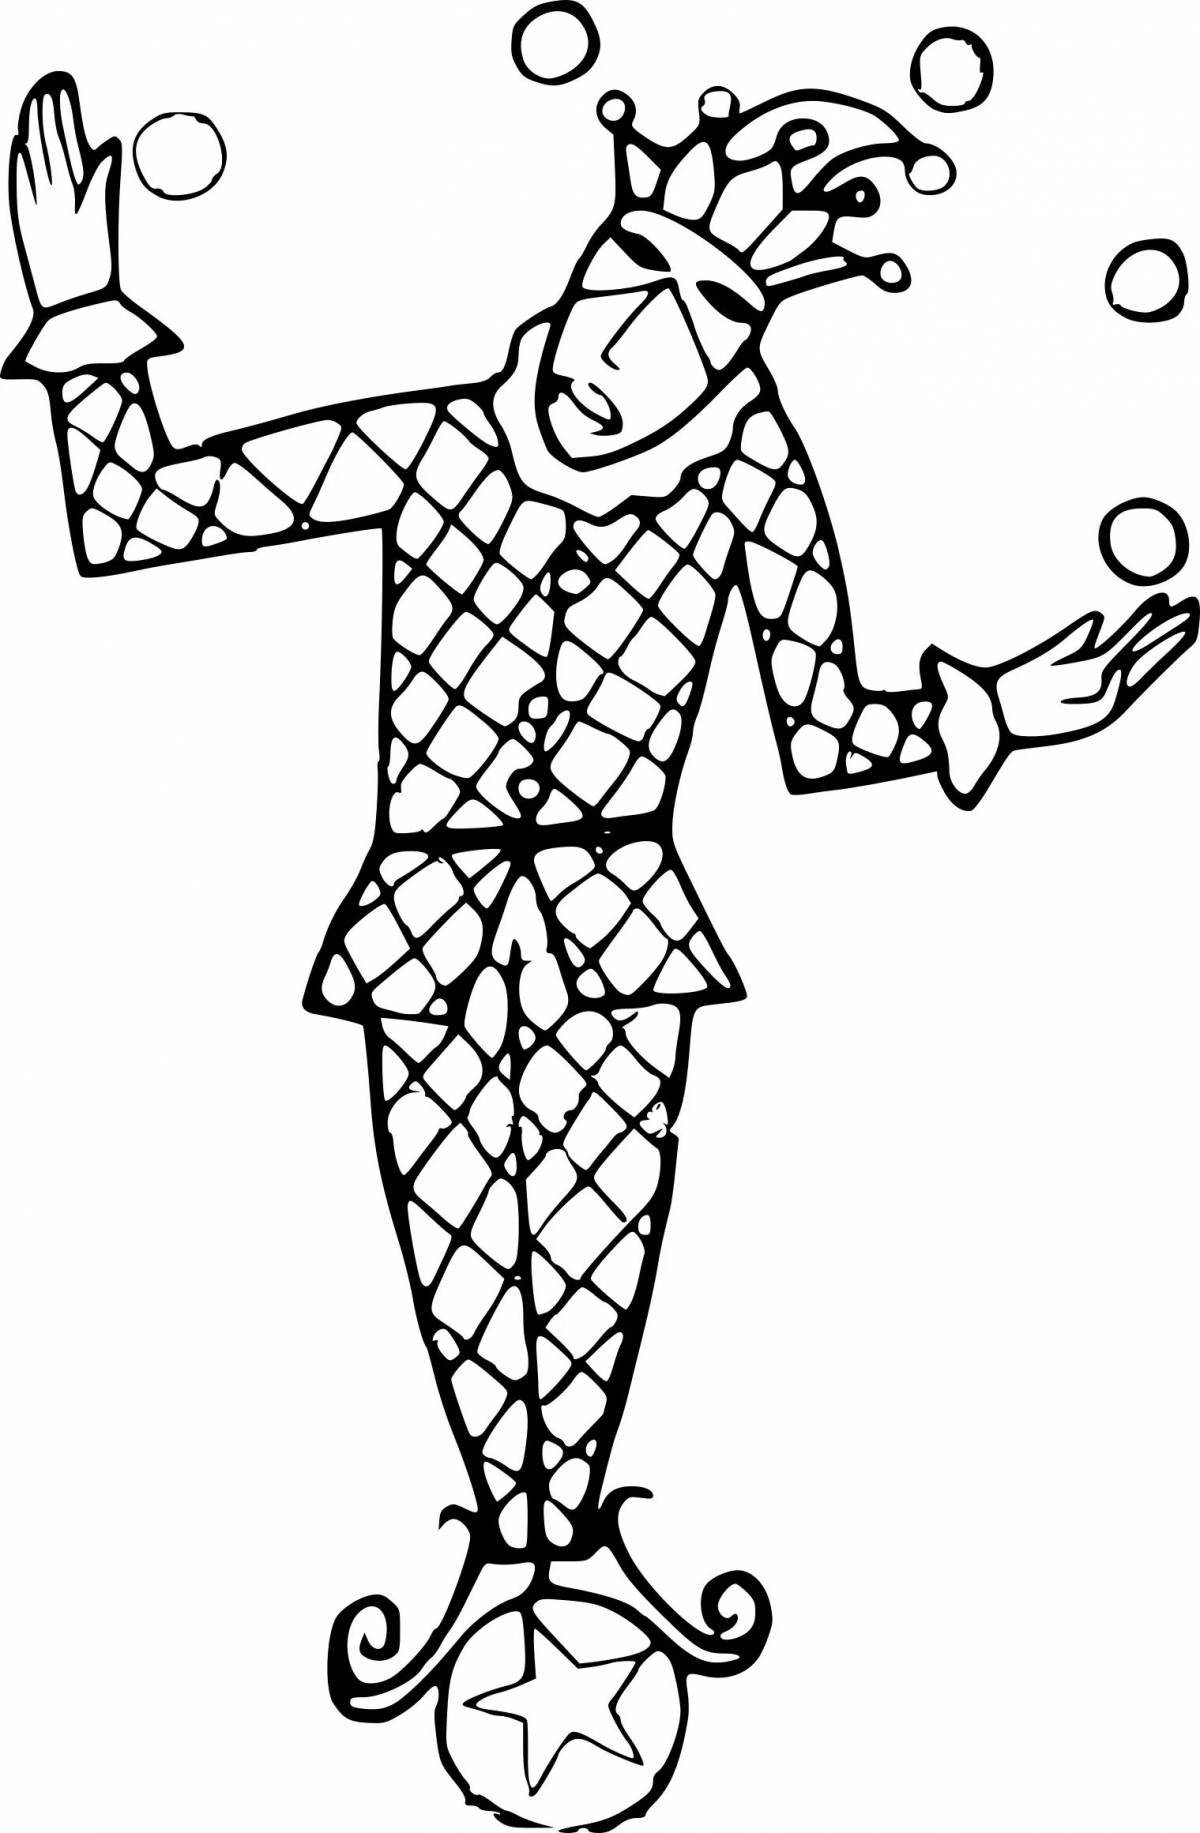 Glowing harlequin coloring page